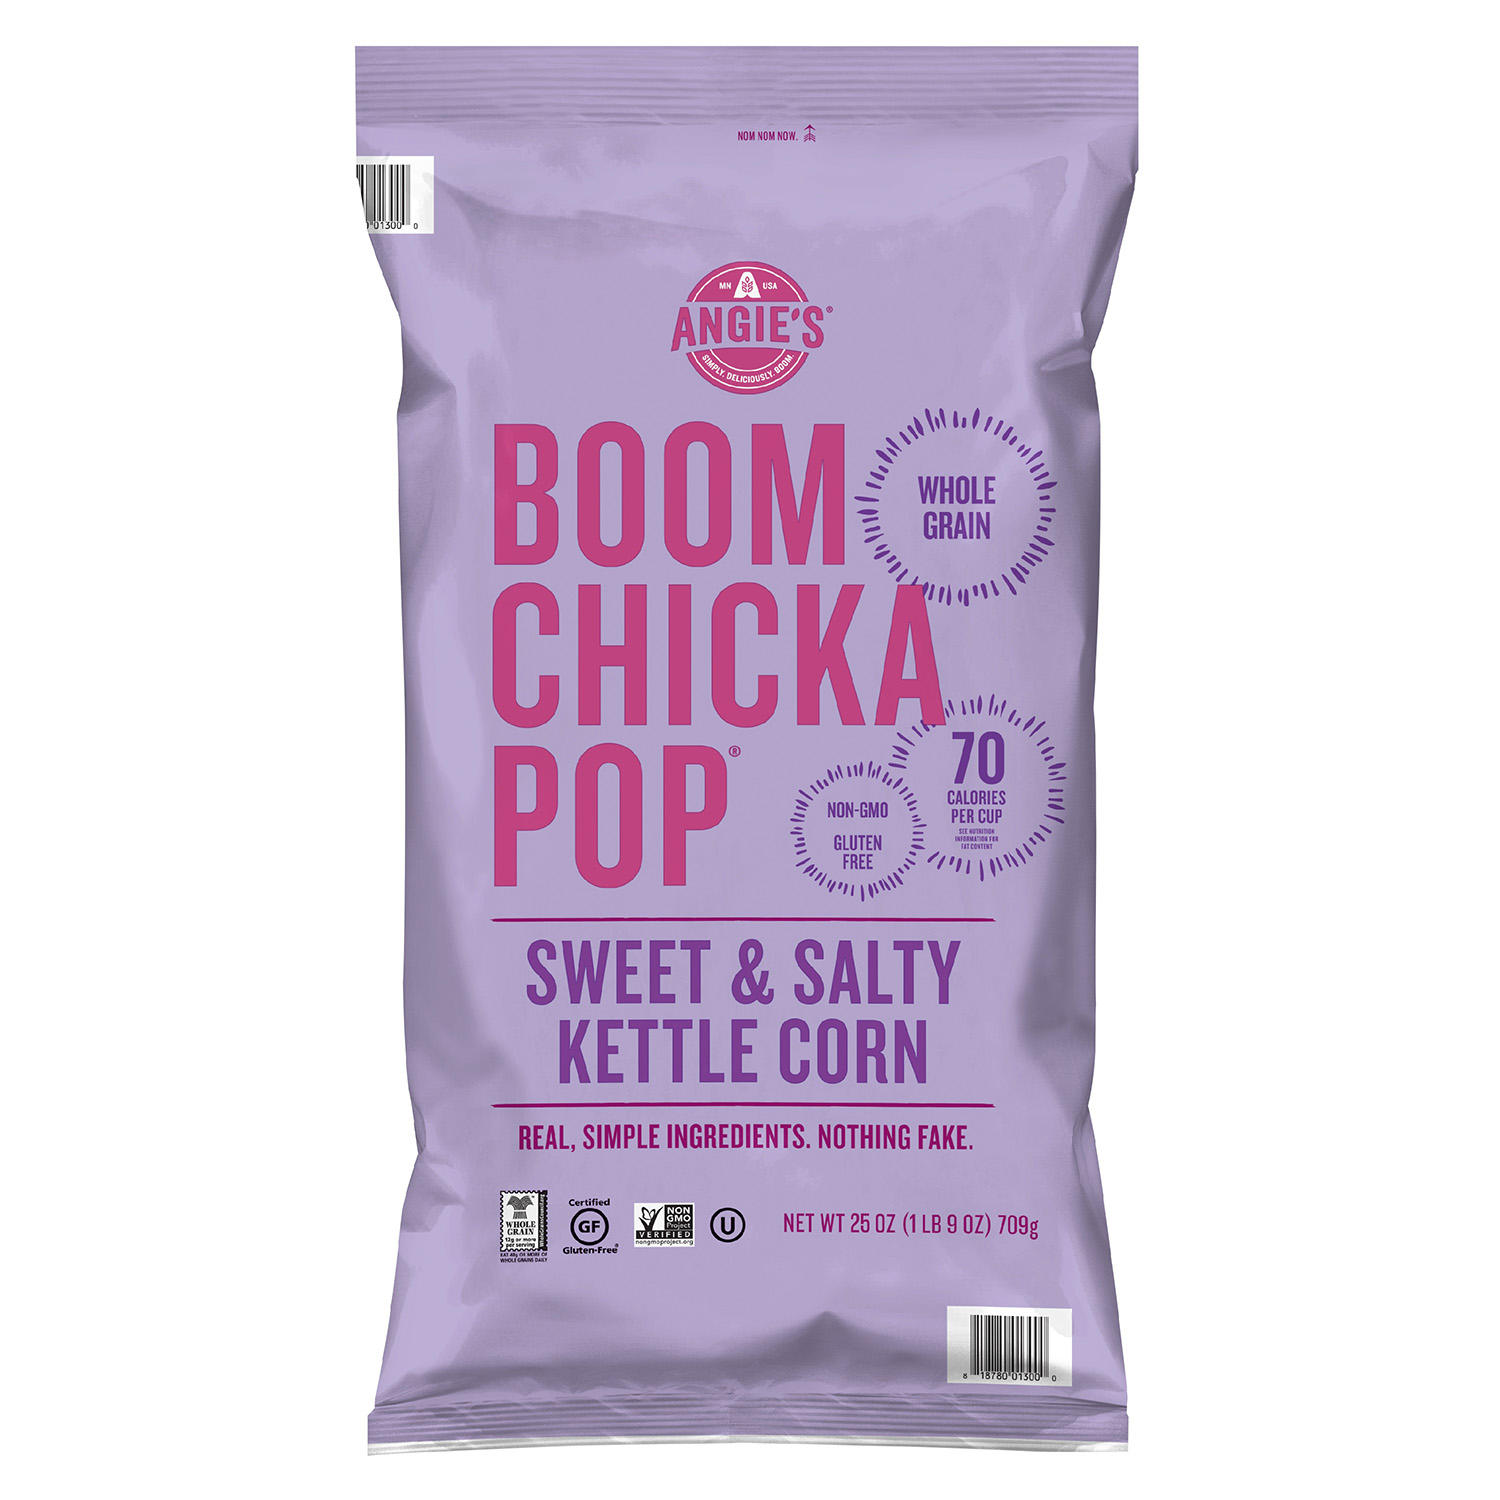 Angie’s Boom Chicka Pop Sweet and Salty Kettle Corn (25 oz.)